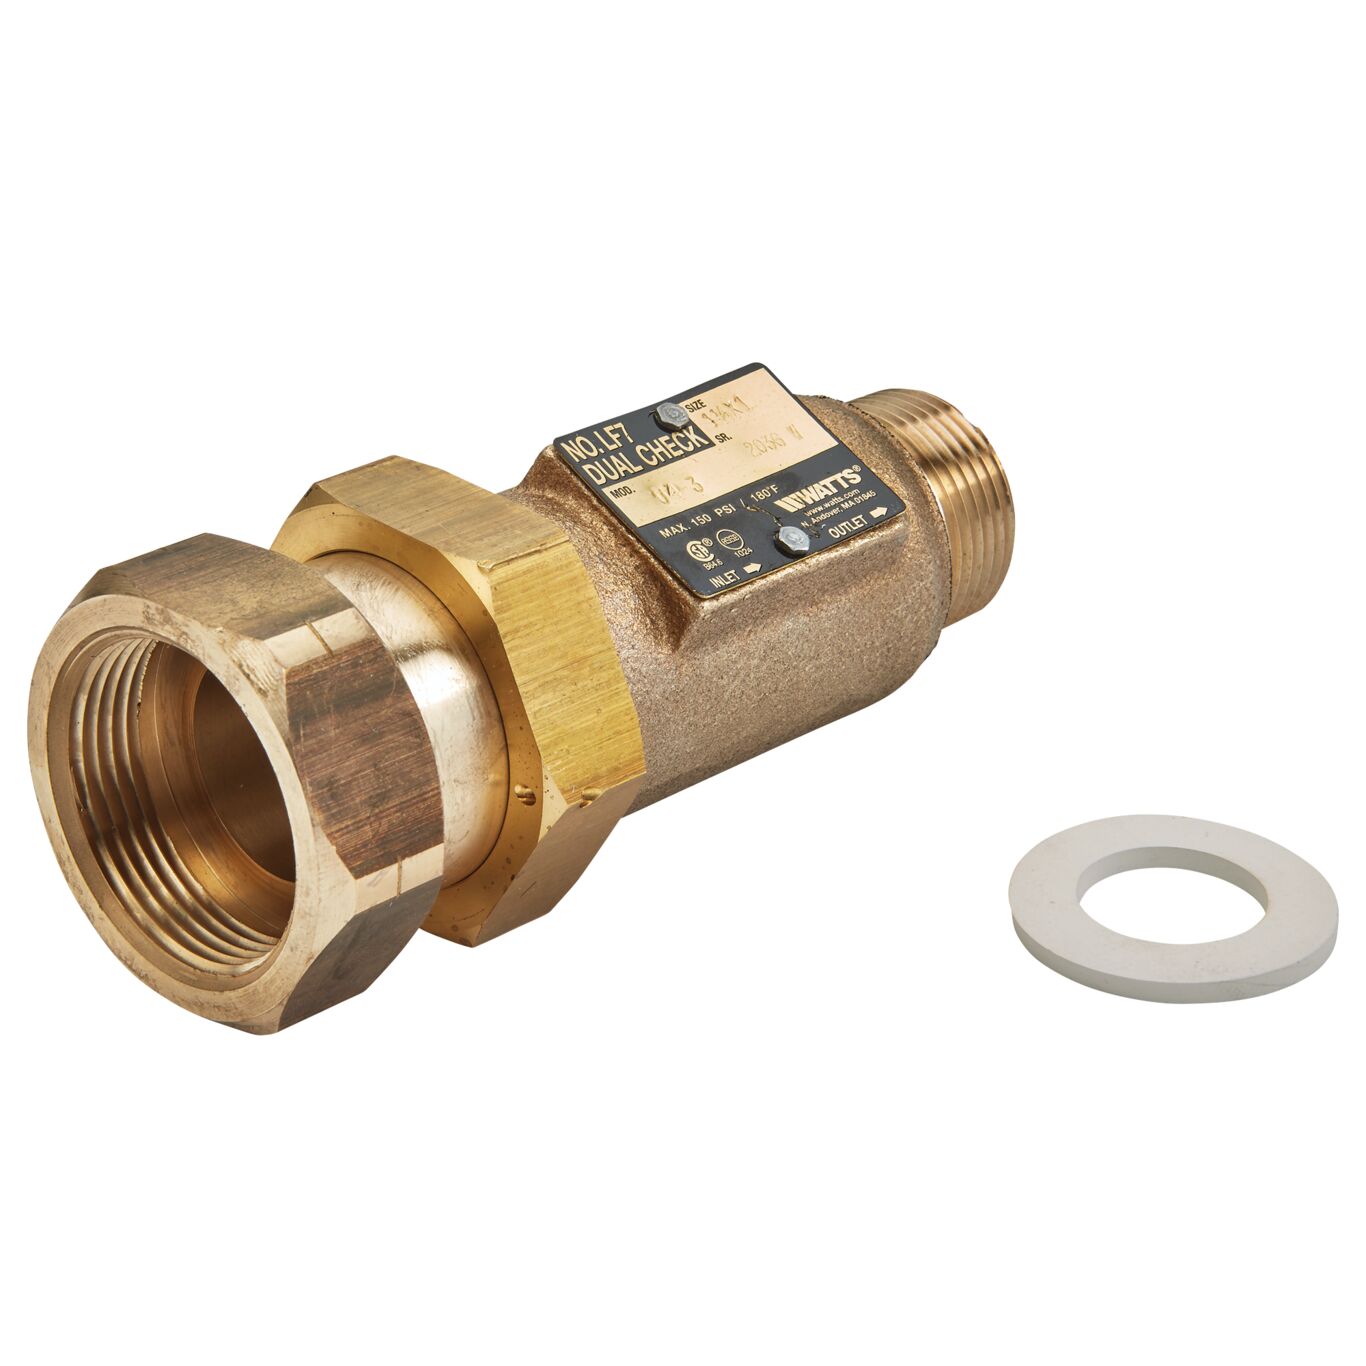 Priduct image 1 1/4 X 1 In Lead Free Dual Check Valve, Union Female Meter Thread Inlet X Male Npt Outlet